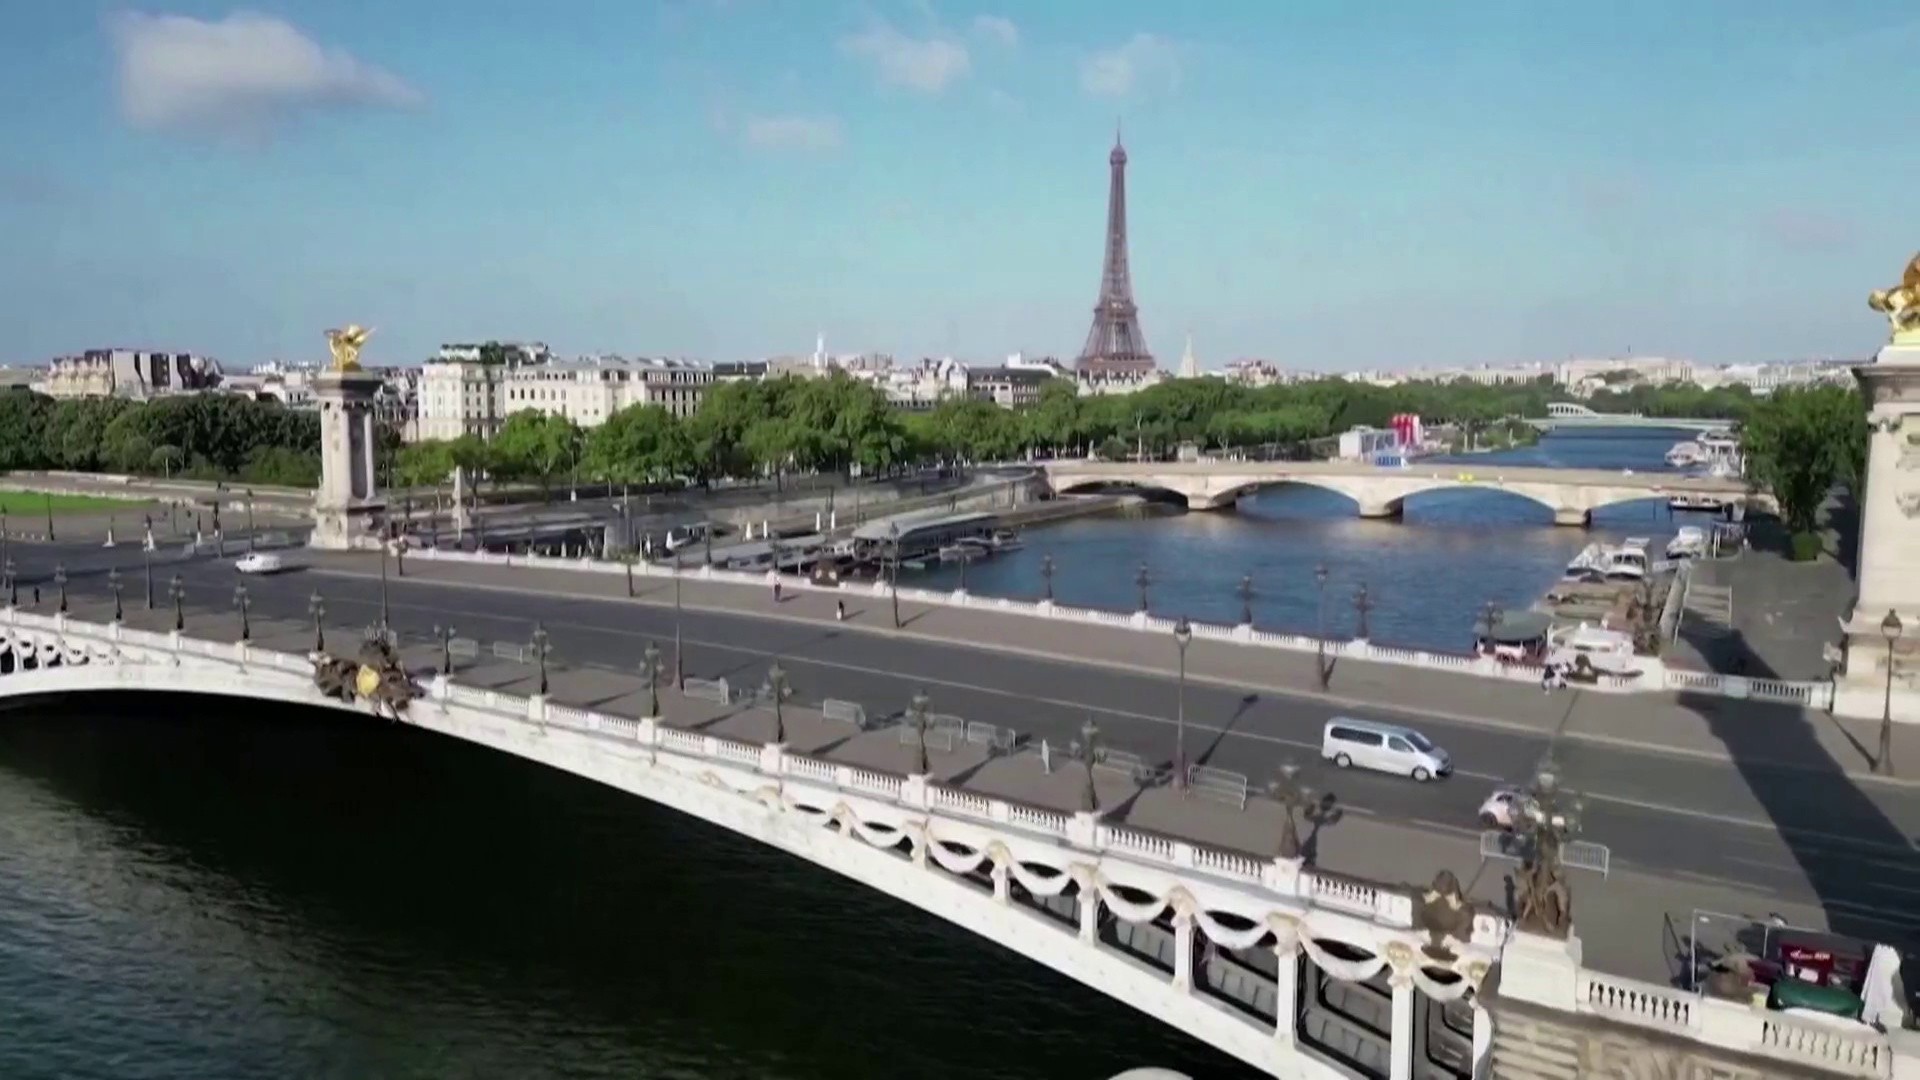 Paris Olympics begin in 6 months! Inside the final preparations